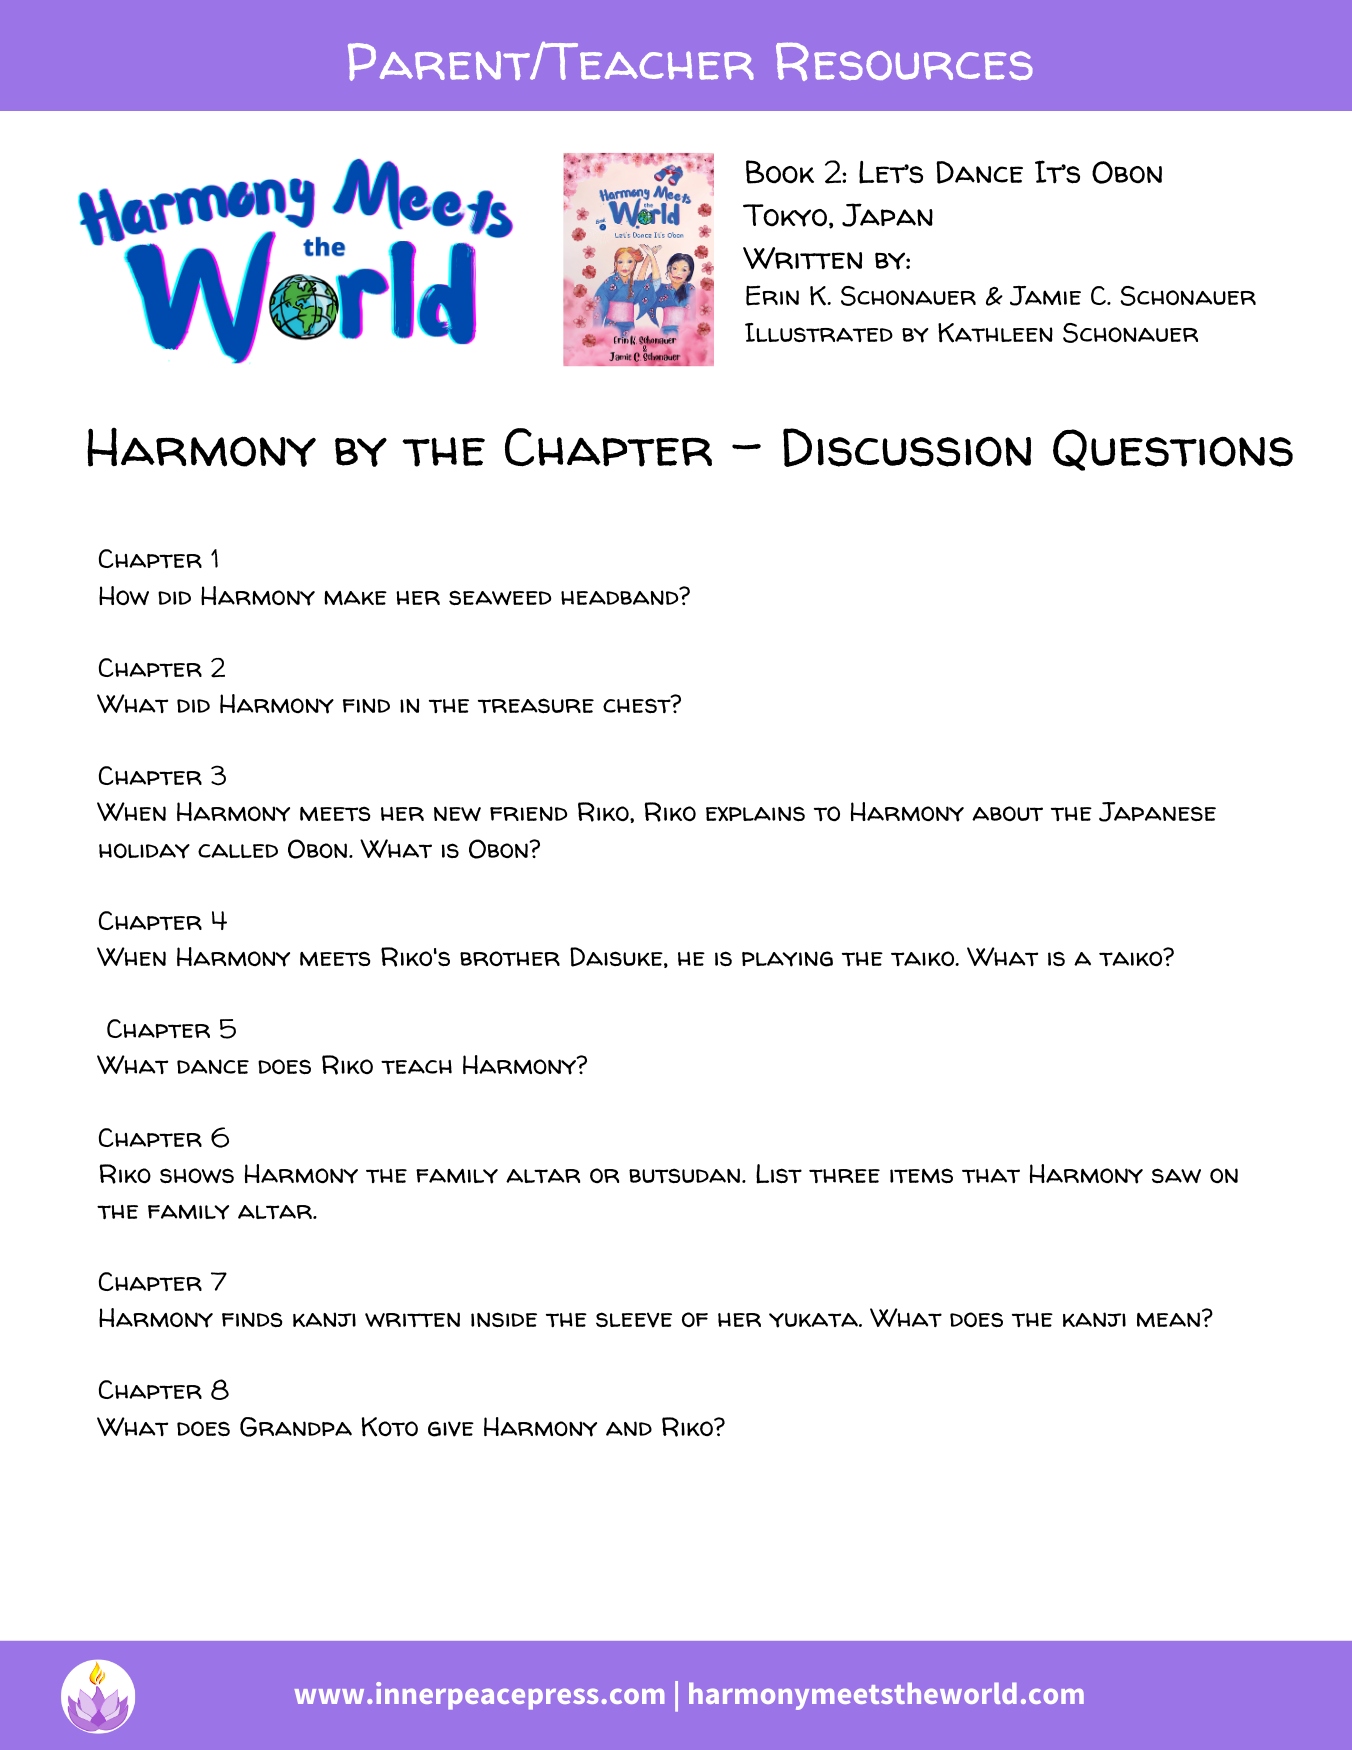 Discussion Questions - Book 2